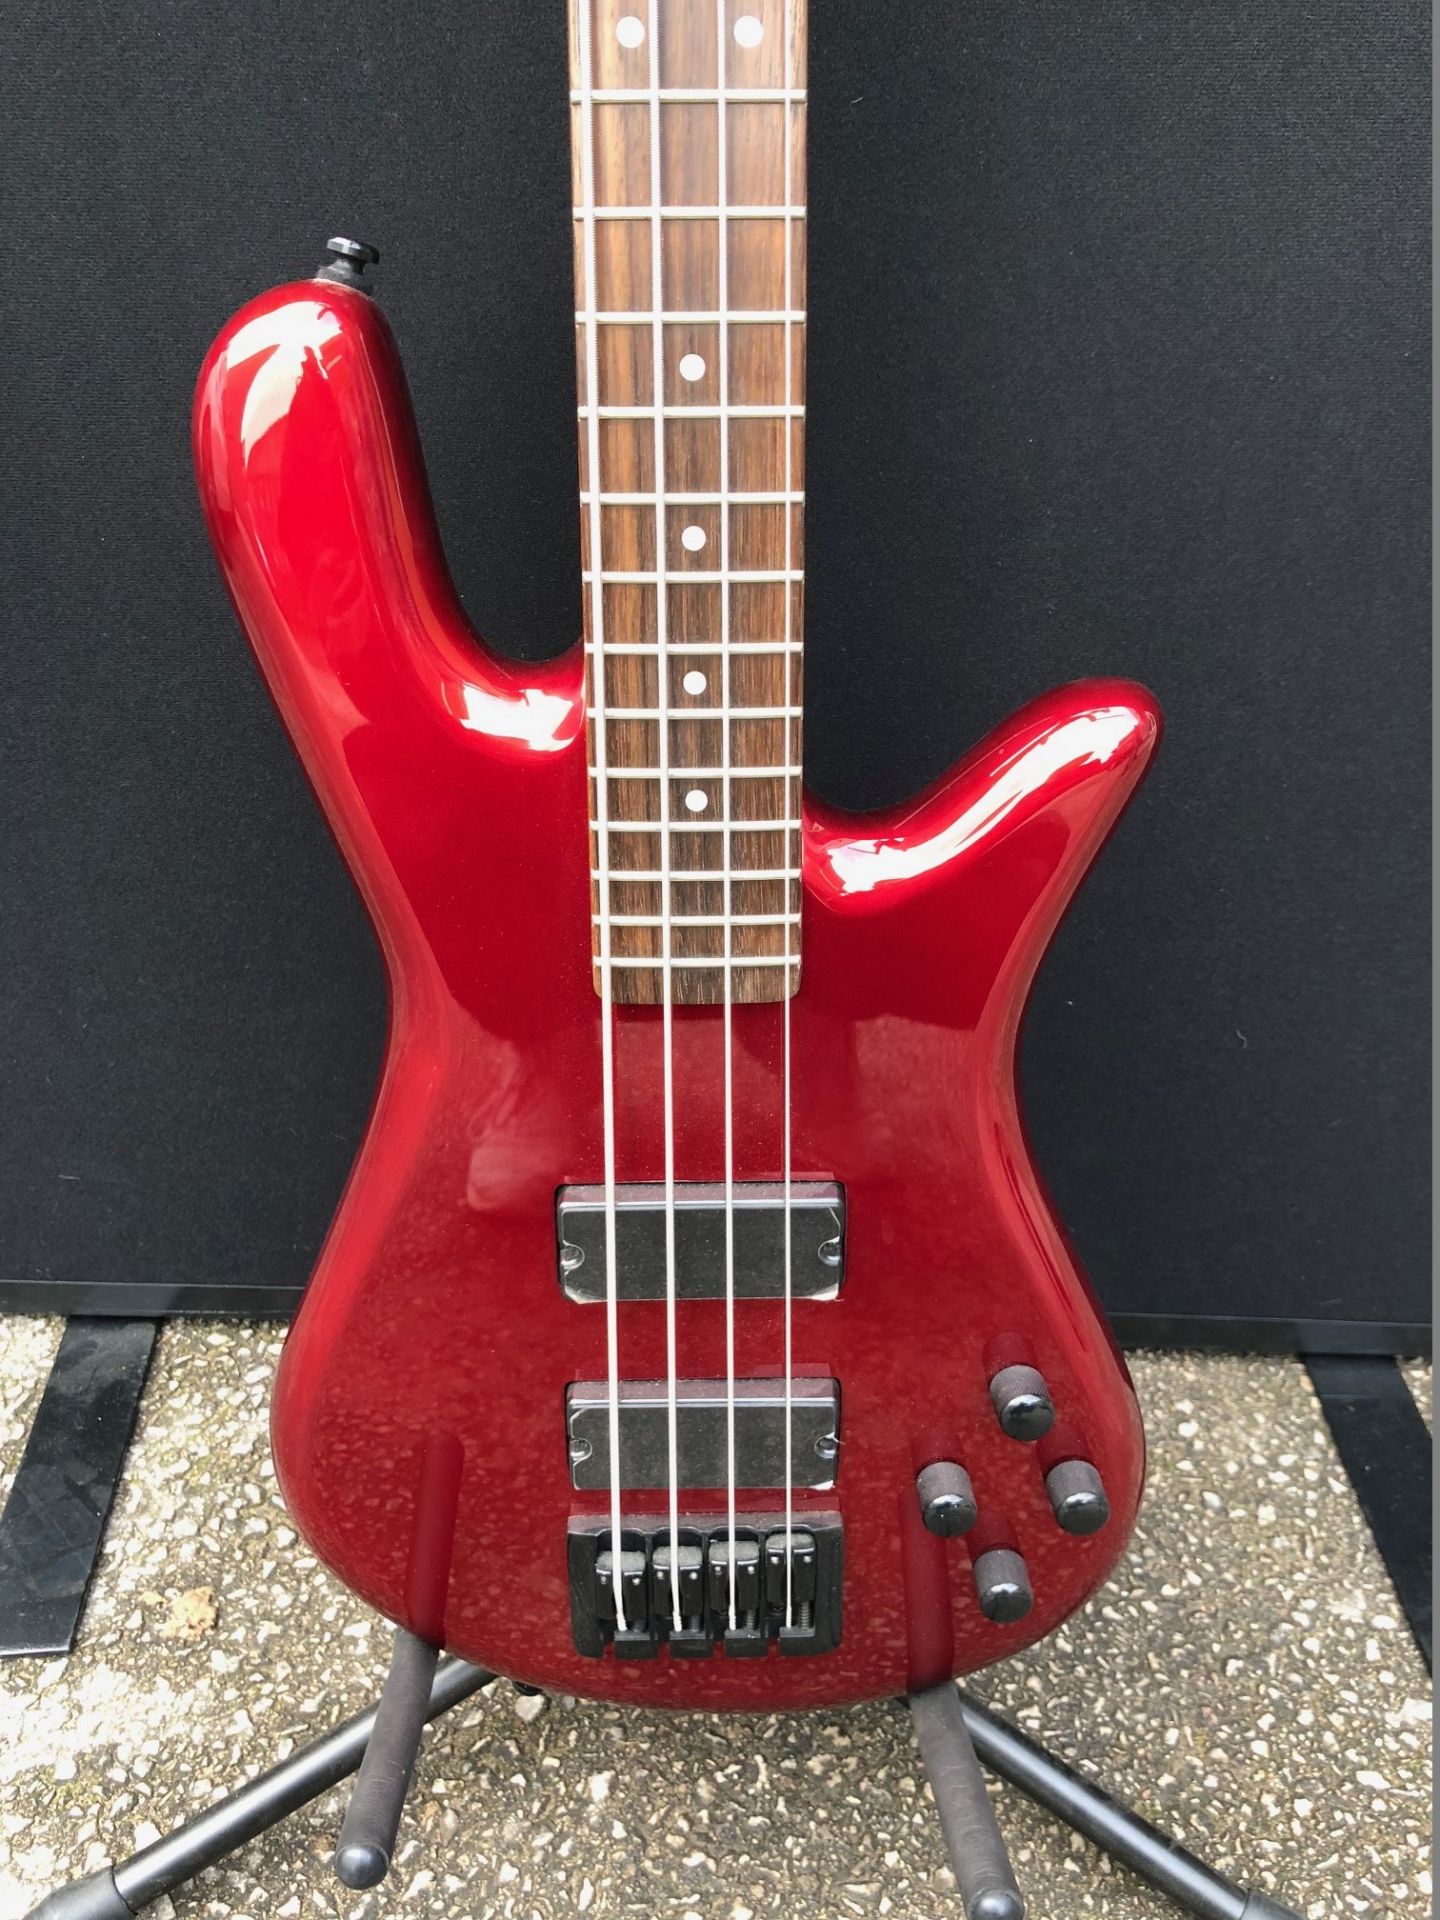 Spector Performer 4 String Electric Bass in Metallic Red (Brand New Ex Display - RRP £319.00) - Image 2 of 6